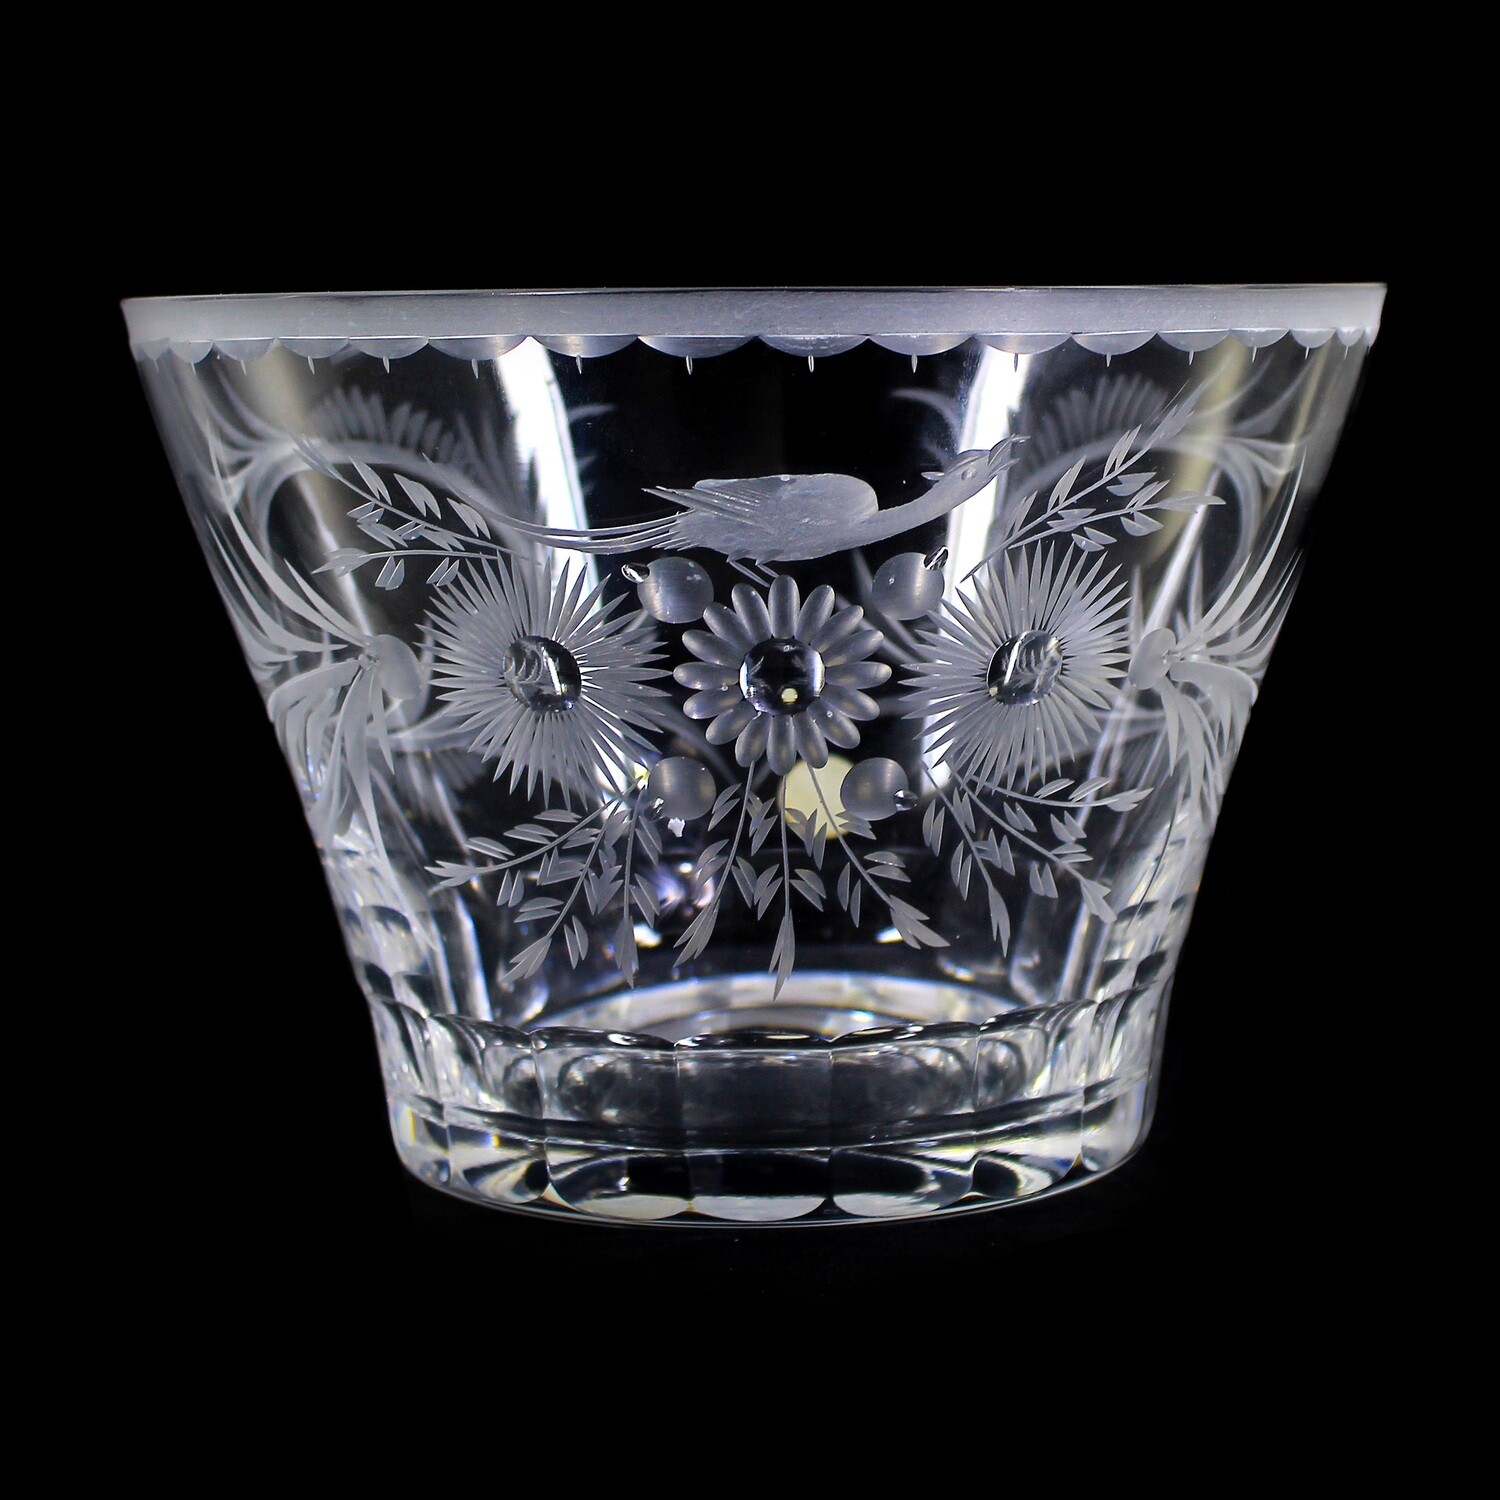 TBowl made of colorless crystal glass with decorative cut decoration, Bavarian Forest, Zwiesel